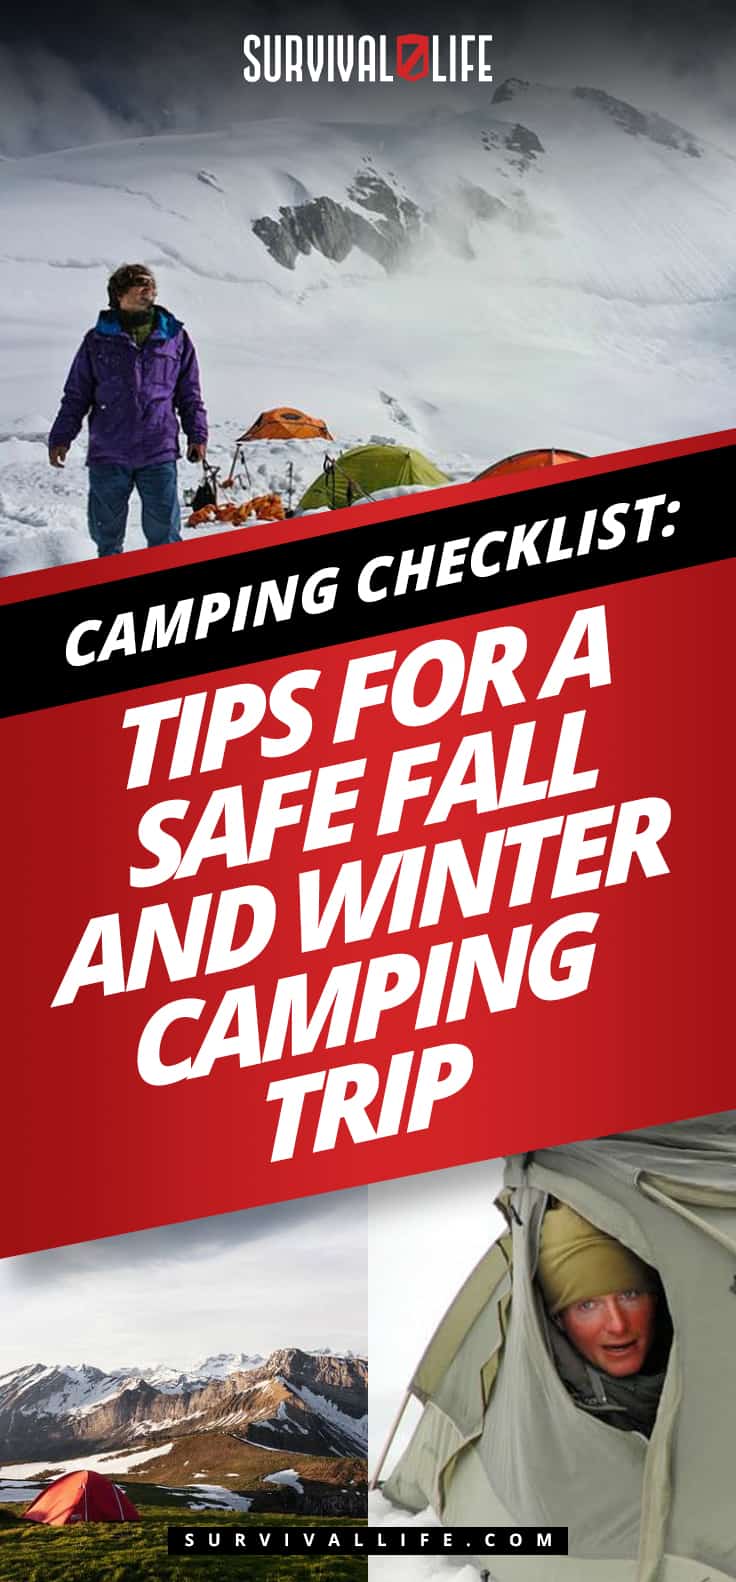 Placard | Camping Checklist: Tips for a Safe Fall and Winter Camping Trip